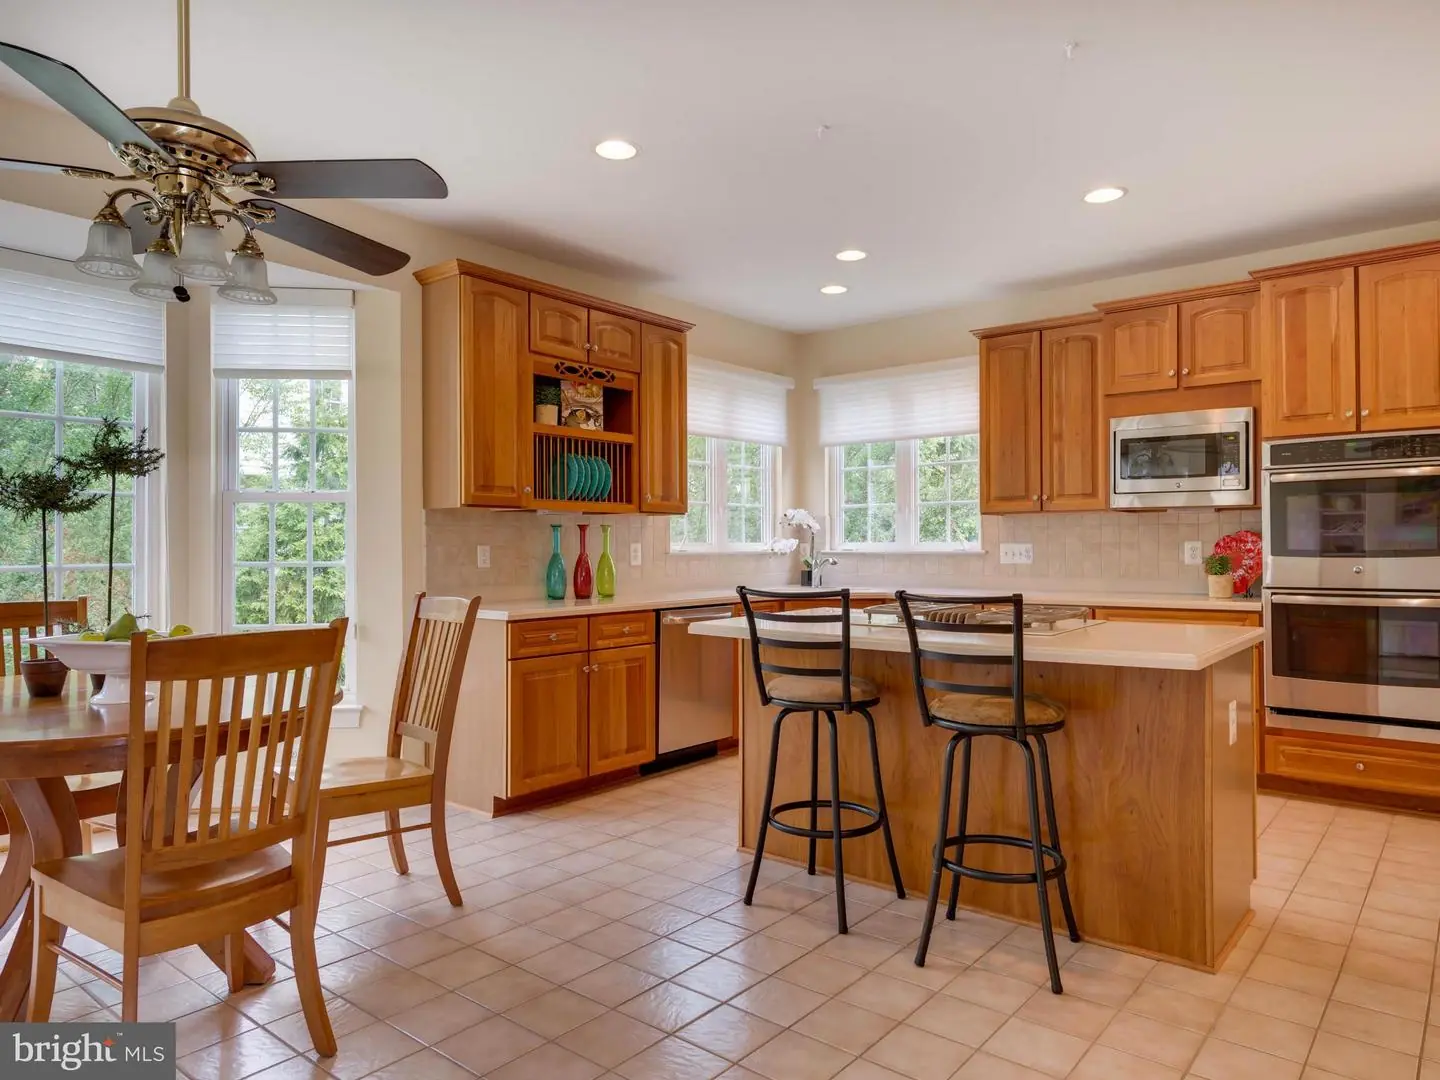 1001946313-300661330572-2021-09-06-14-19-43  |  Governors Hll | Alexandria Delaware Real Estate For Sale | MLS# 1001946313  - Best of Northern Virginia